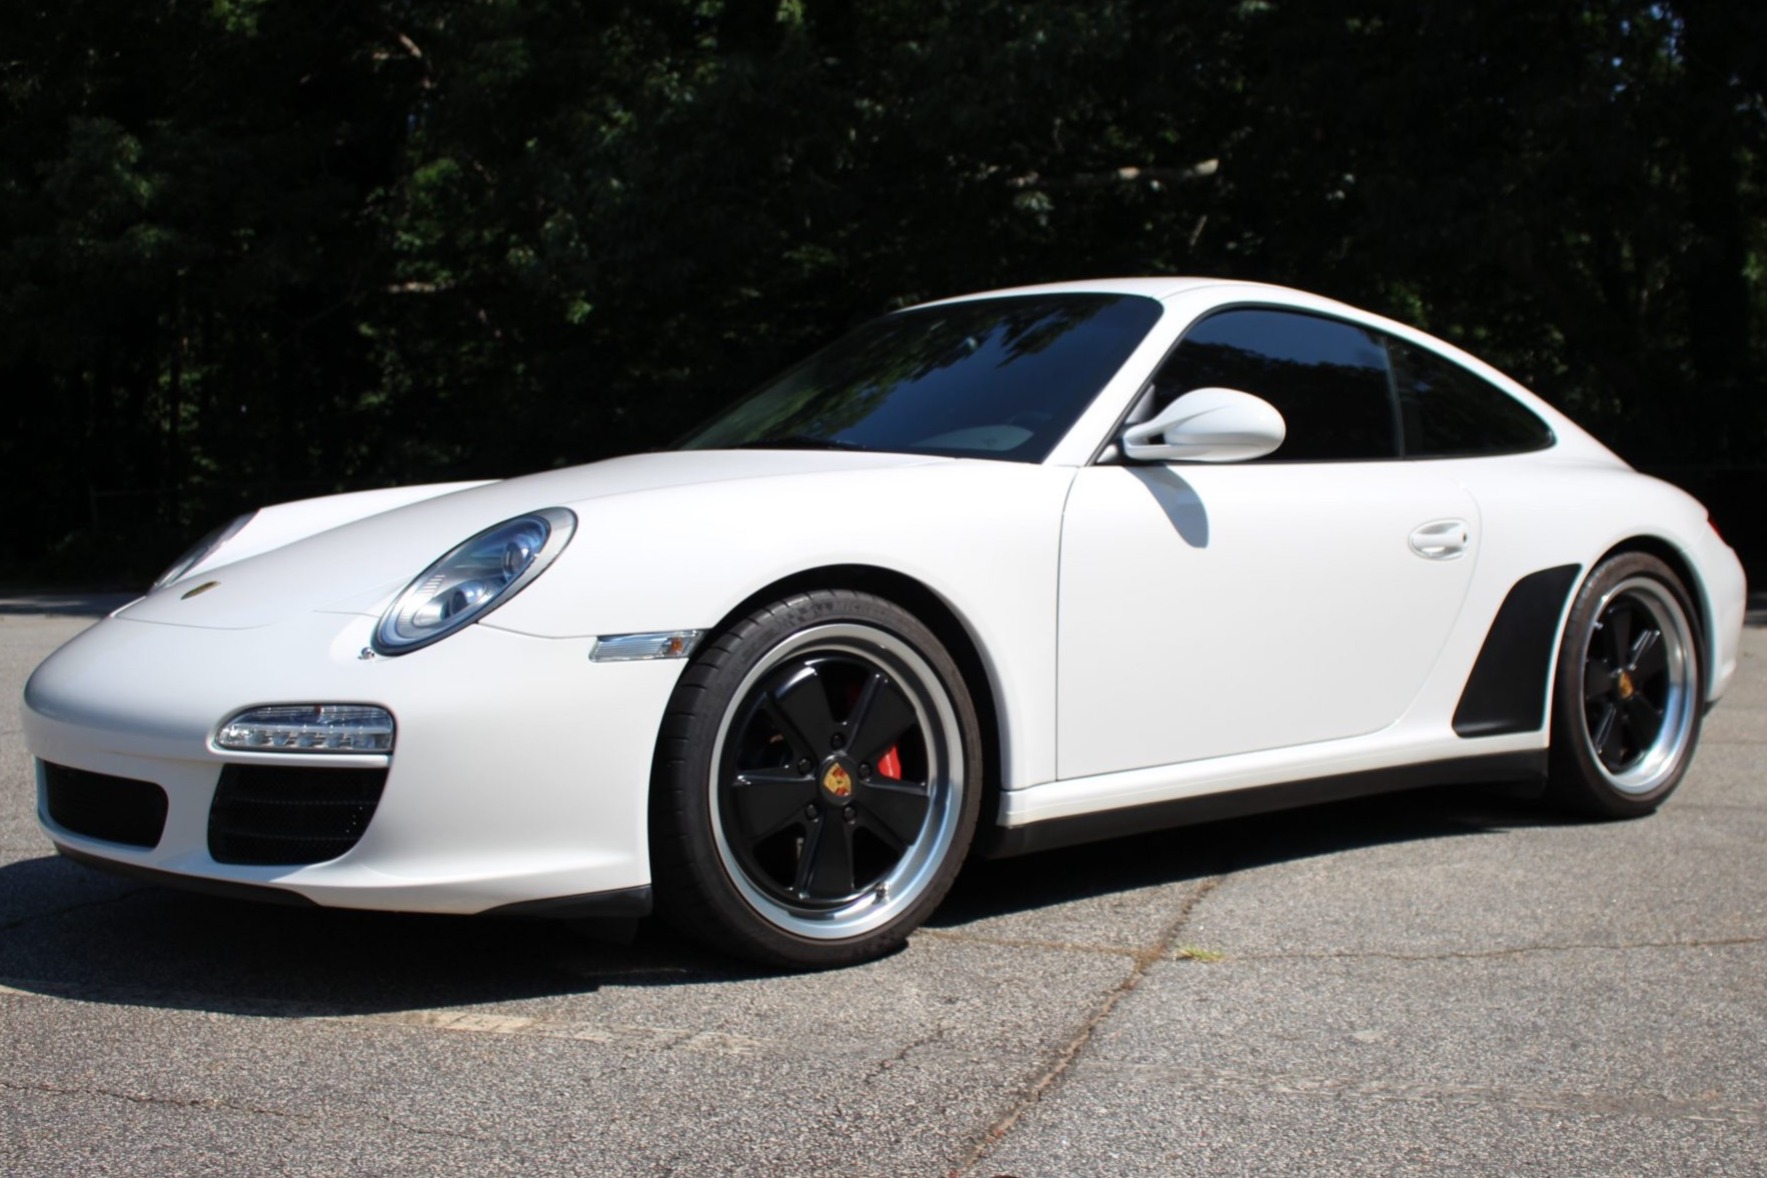 Used 37k-Mile 2011 Porsche 911 Carrera 4S Coupe Review